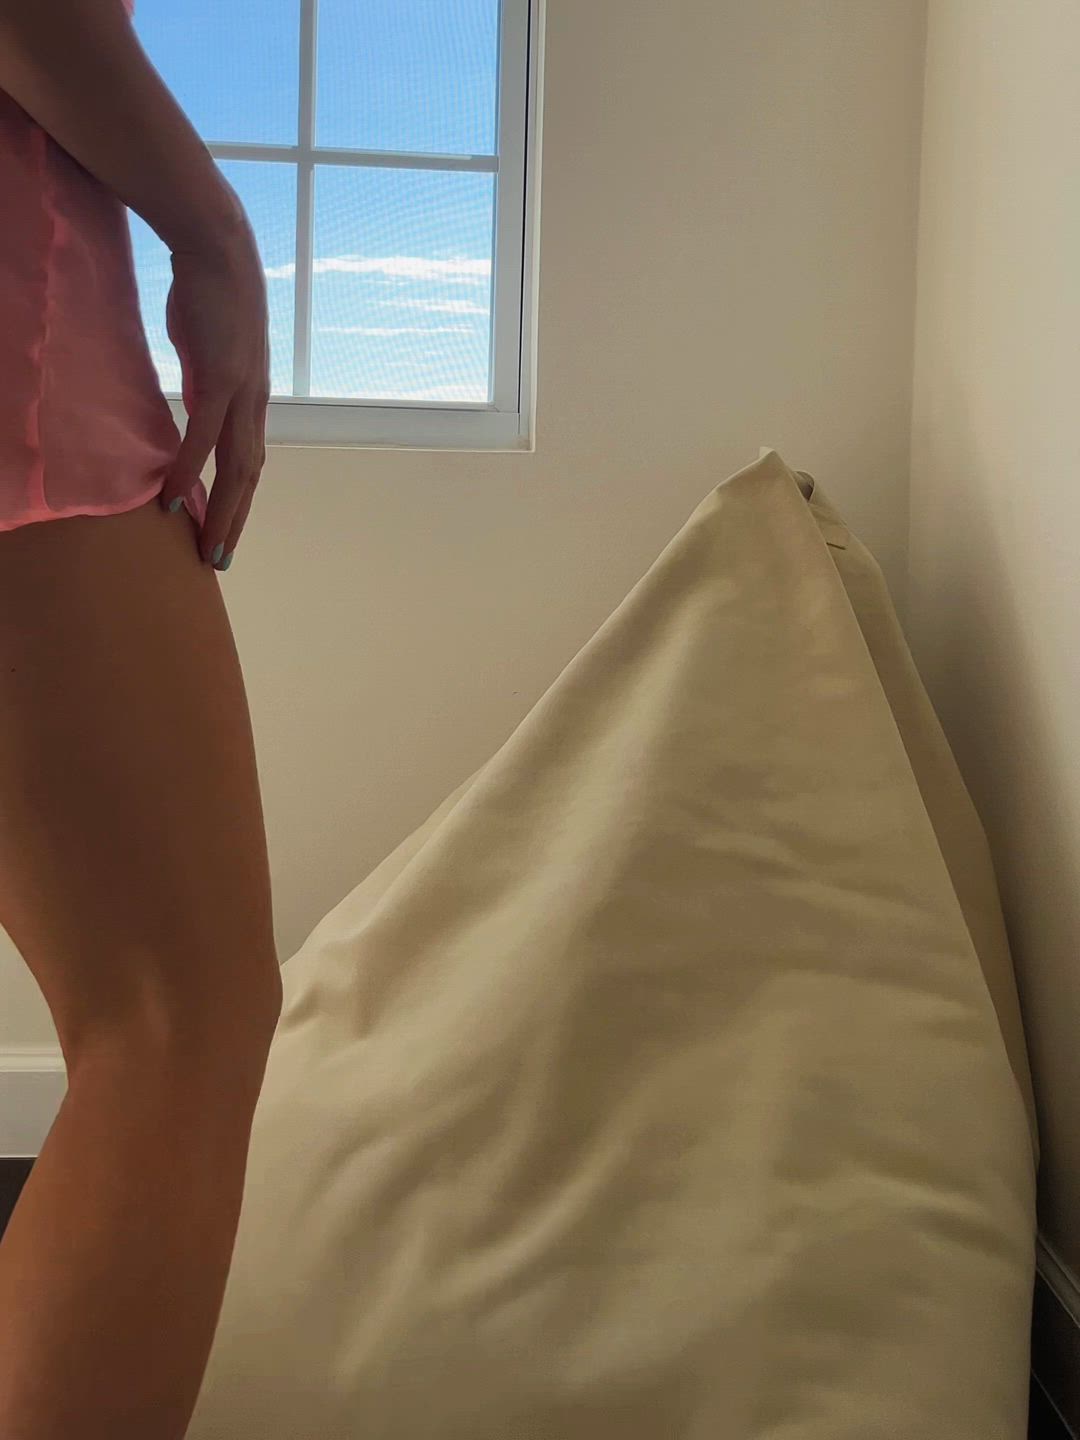 Ass porn video with onlyfans model badberry <strong>@bad-berry</strong>